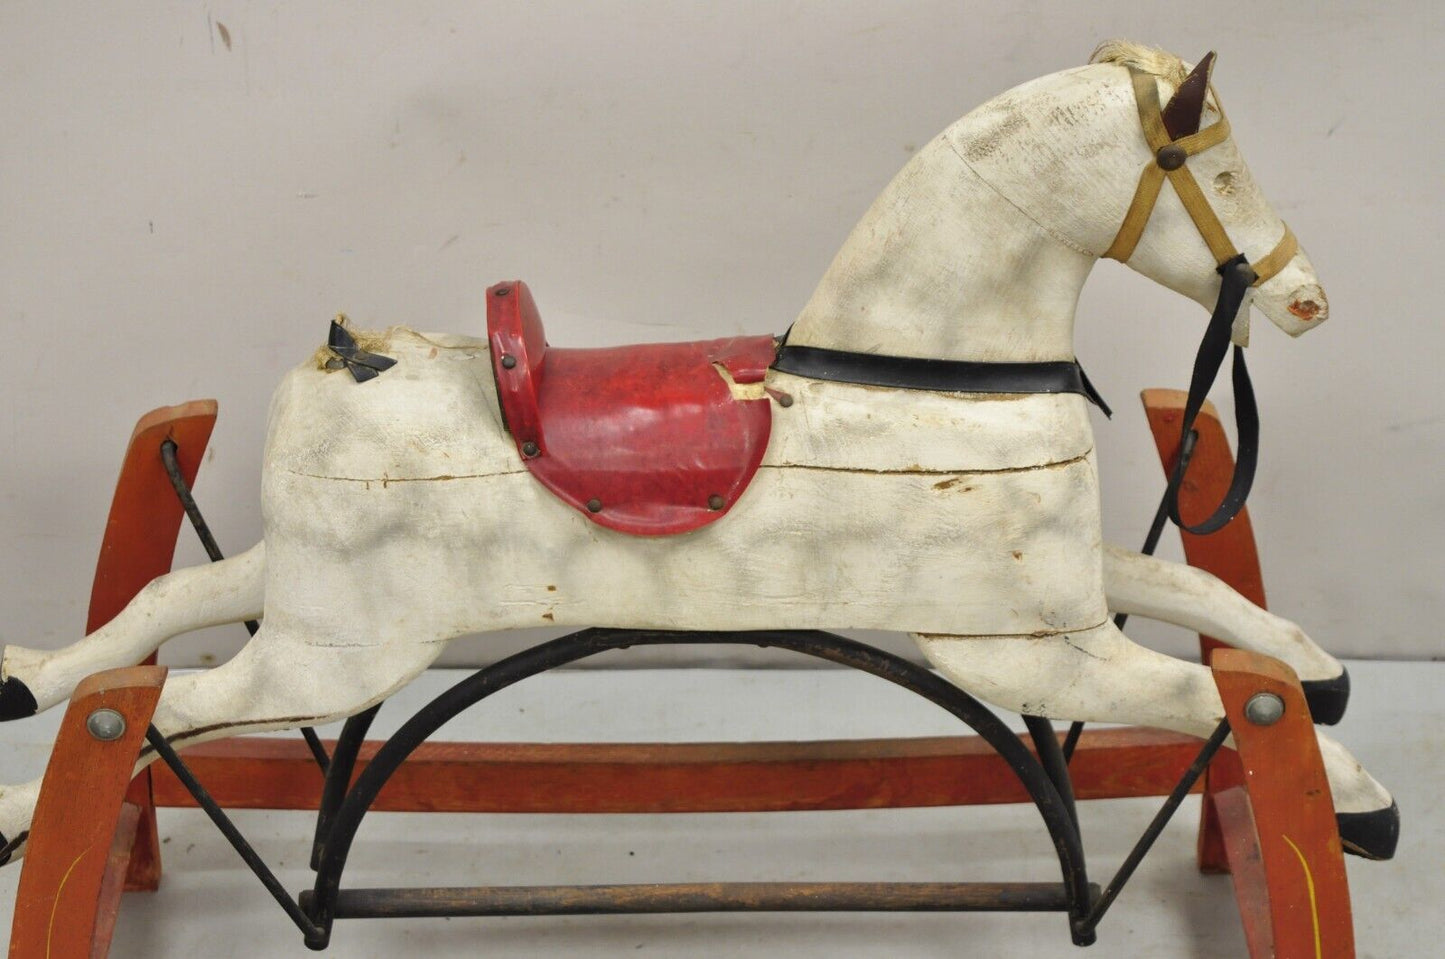 Antique Victorian Rocking Horse Glider Childs Toy Carved Wood White Red Painted